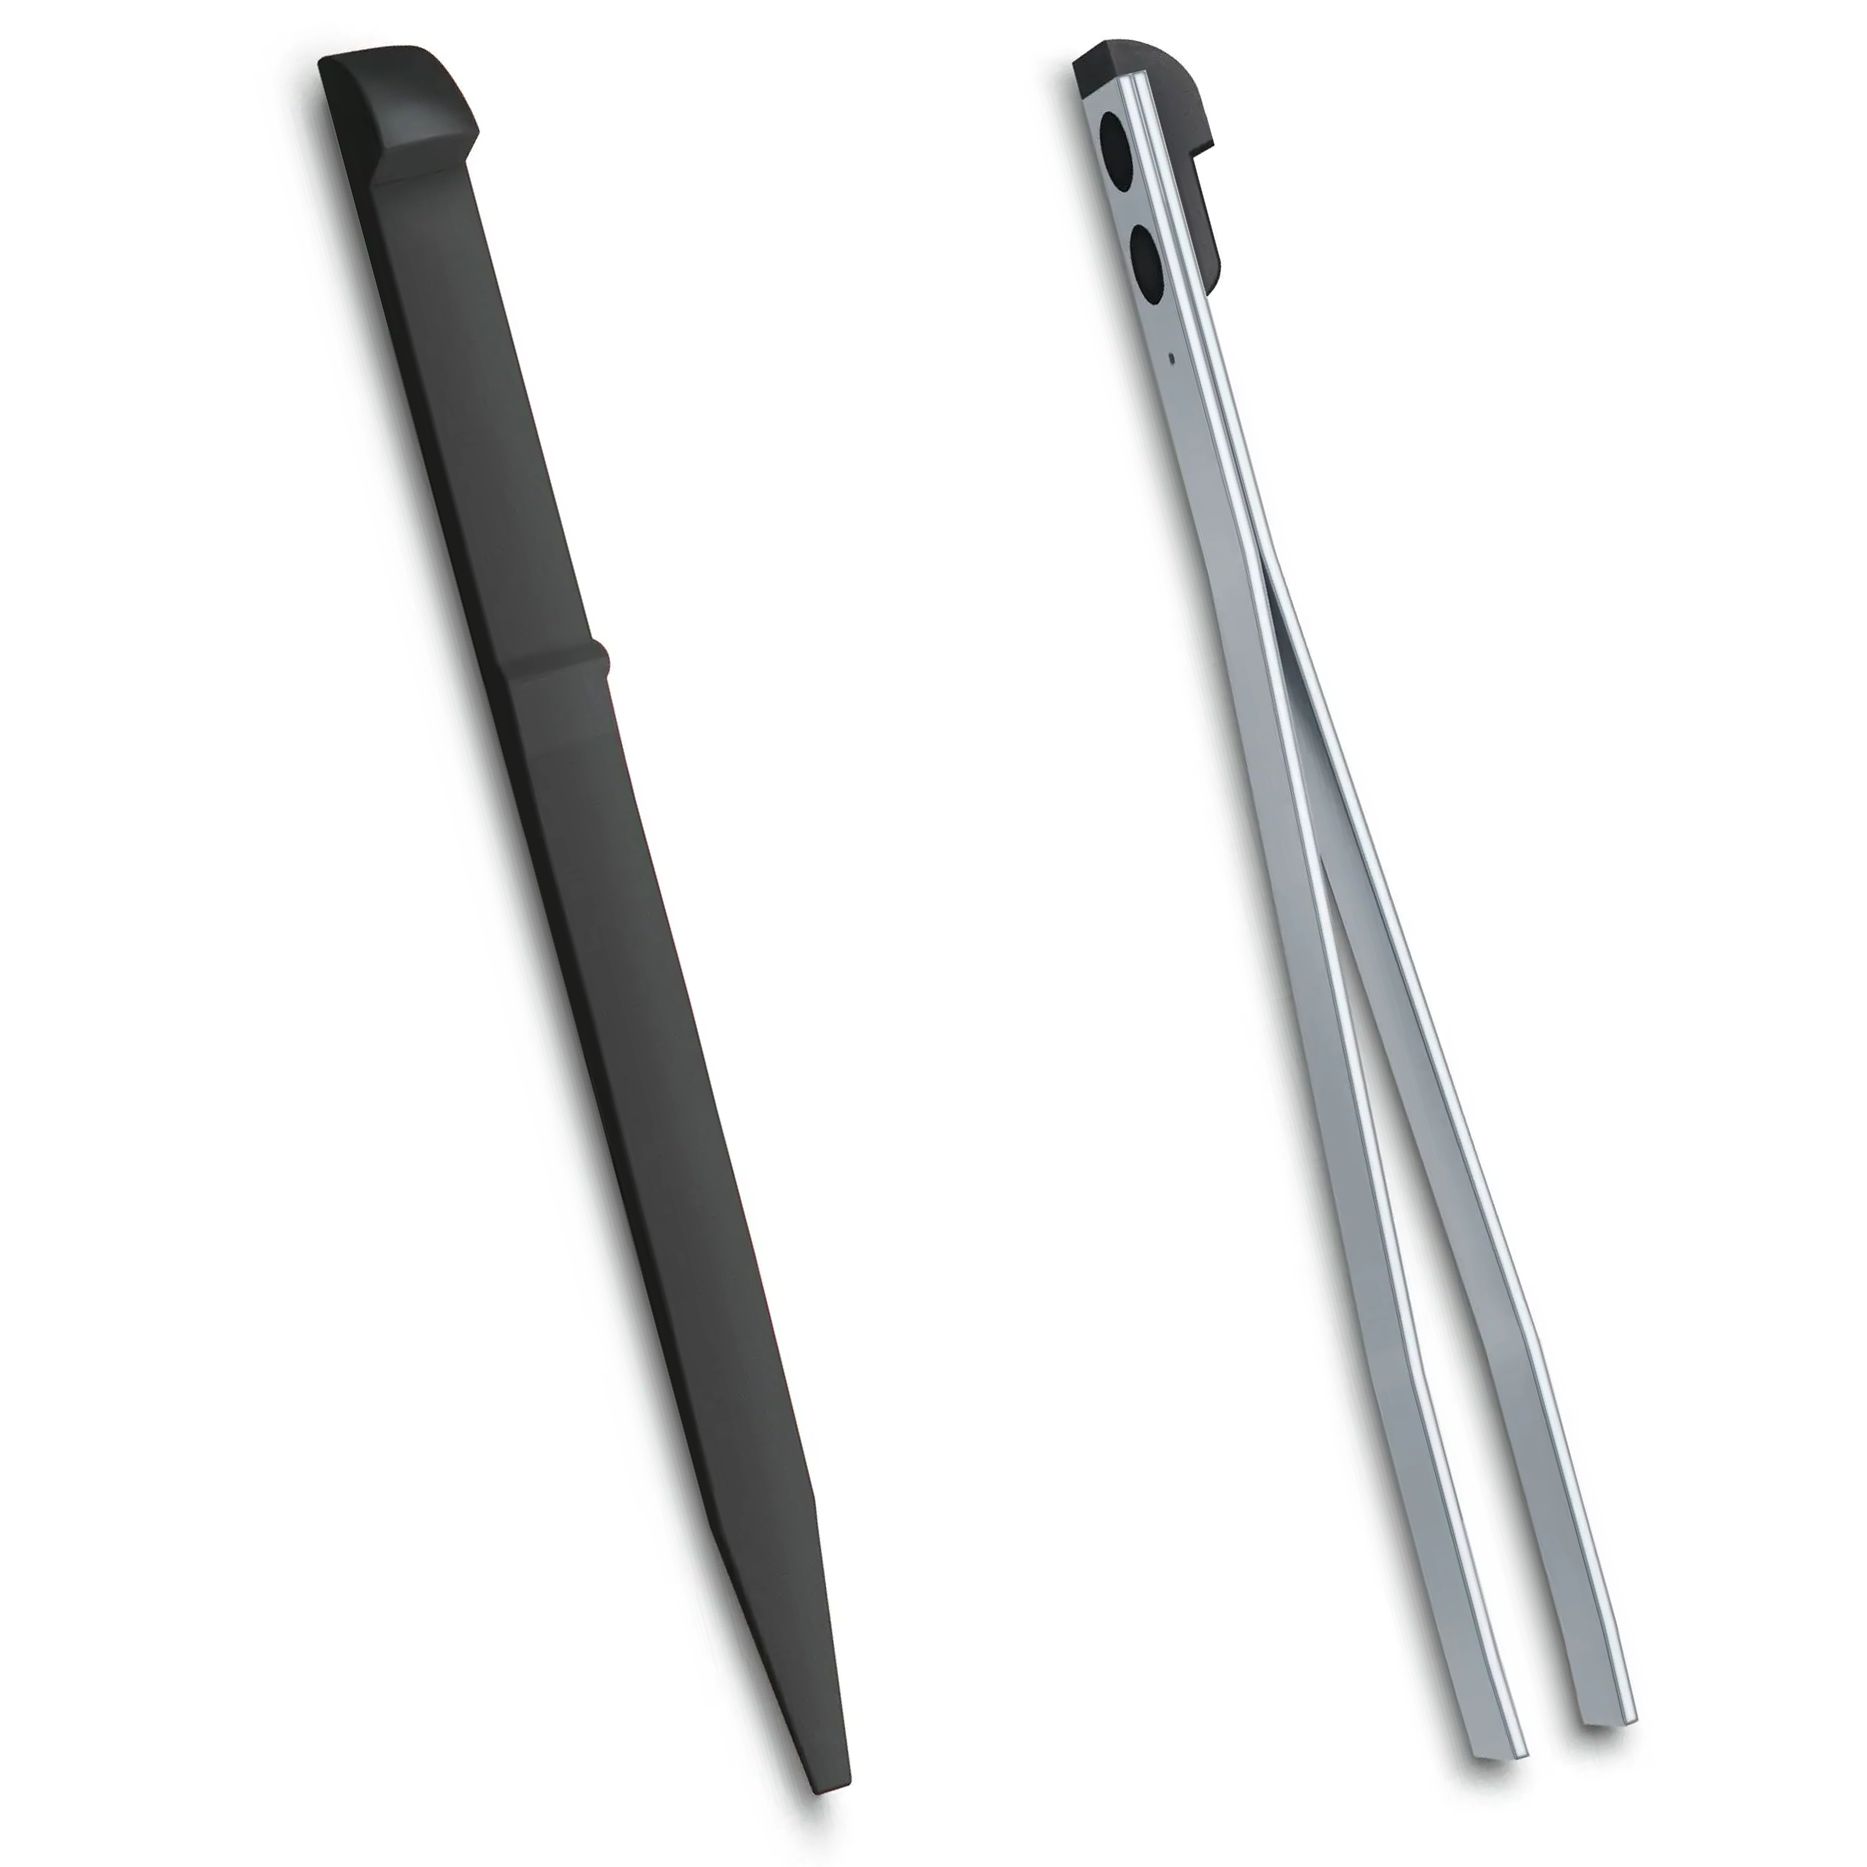 Victorinox BLACK toothpick + tweezers spares for SMALL 58mm swiss army knife - official Victorinox stockist